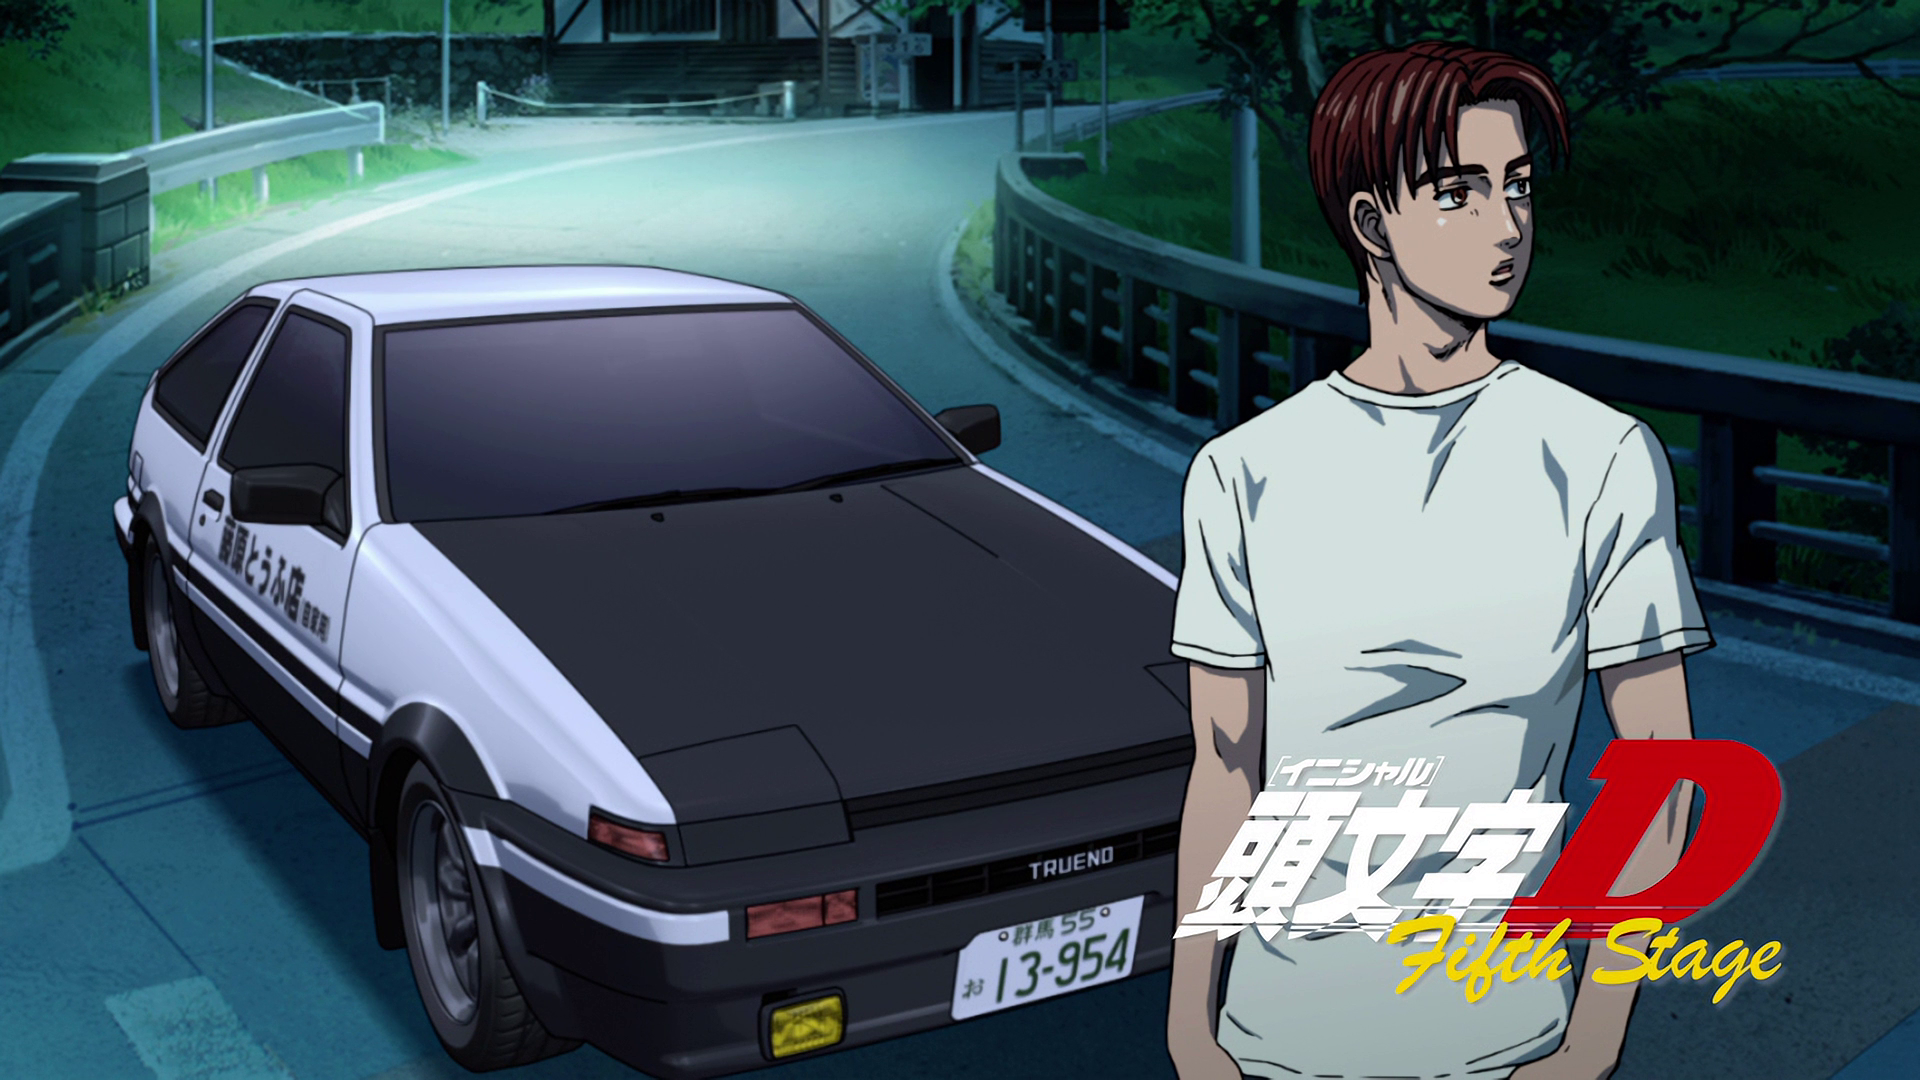 Final Stage - Act 1, Initial D Wiki